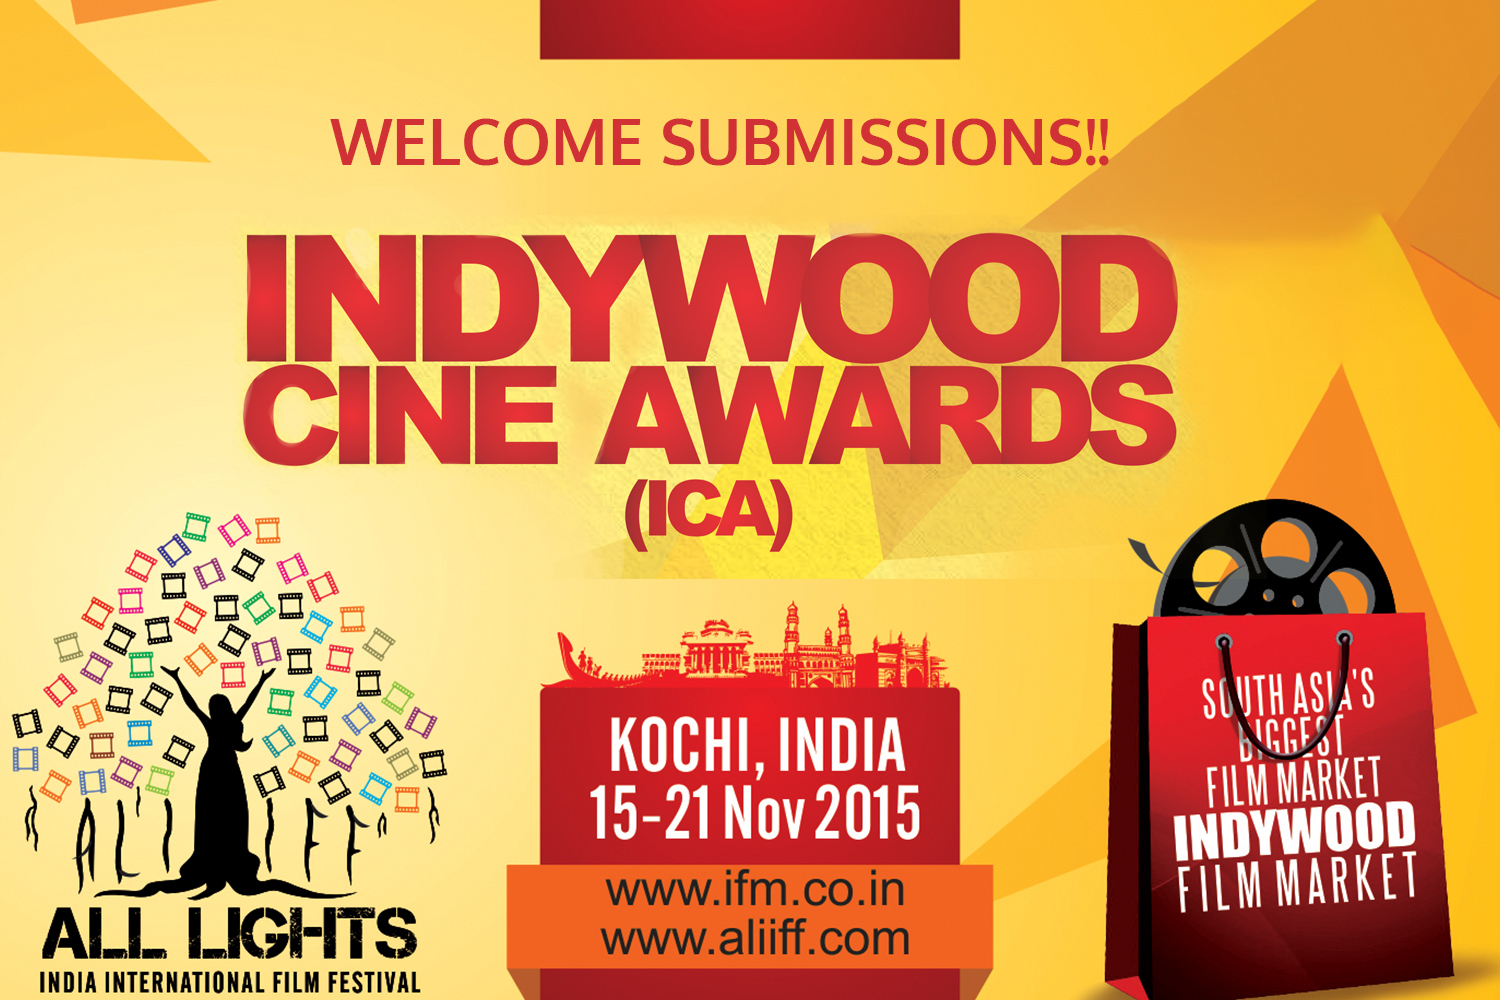 Exclusive Indywood Cine Awards to be given away at ALIIFF